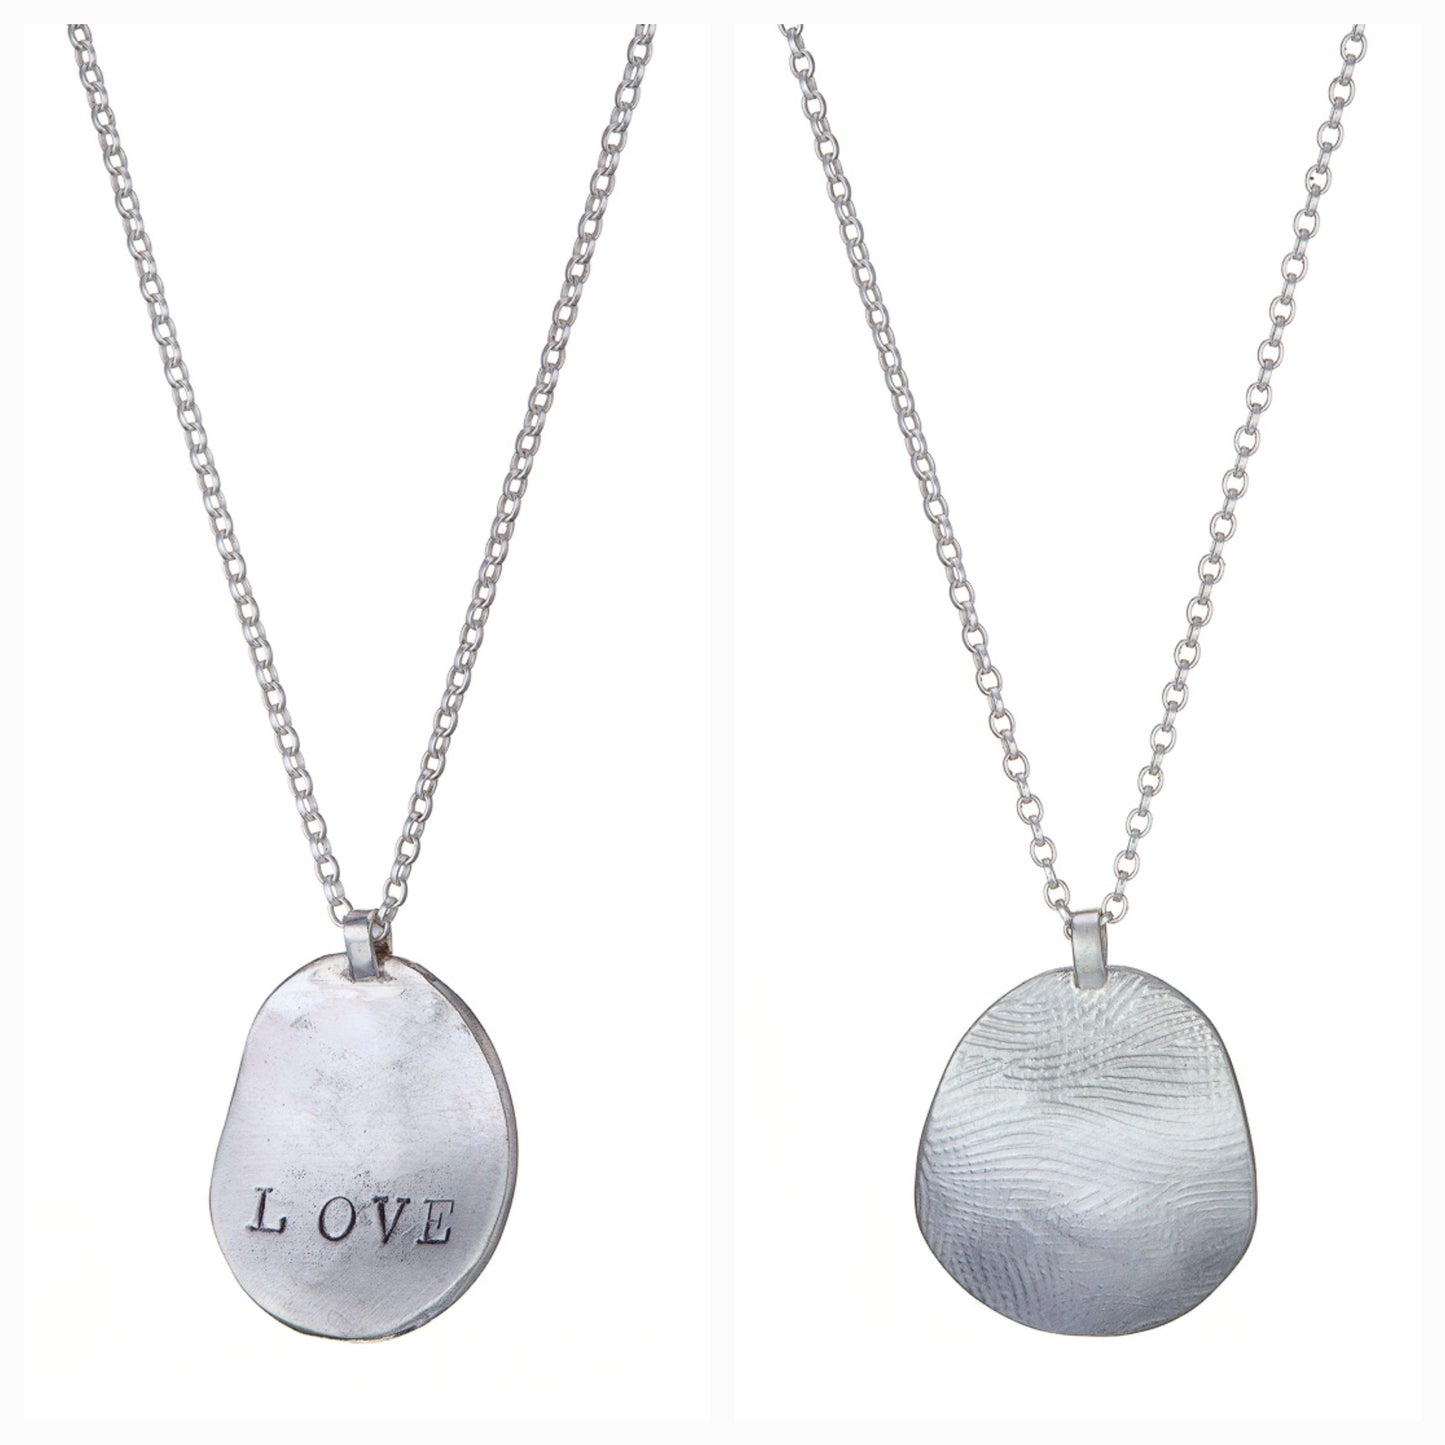 Dóchas Small Love Pendent